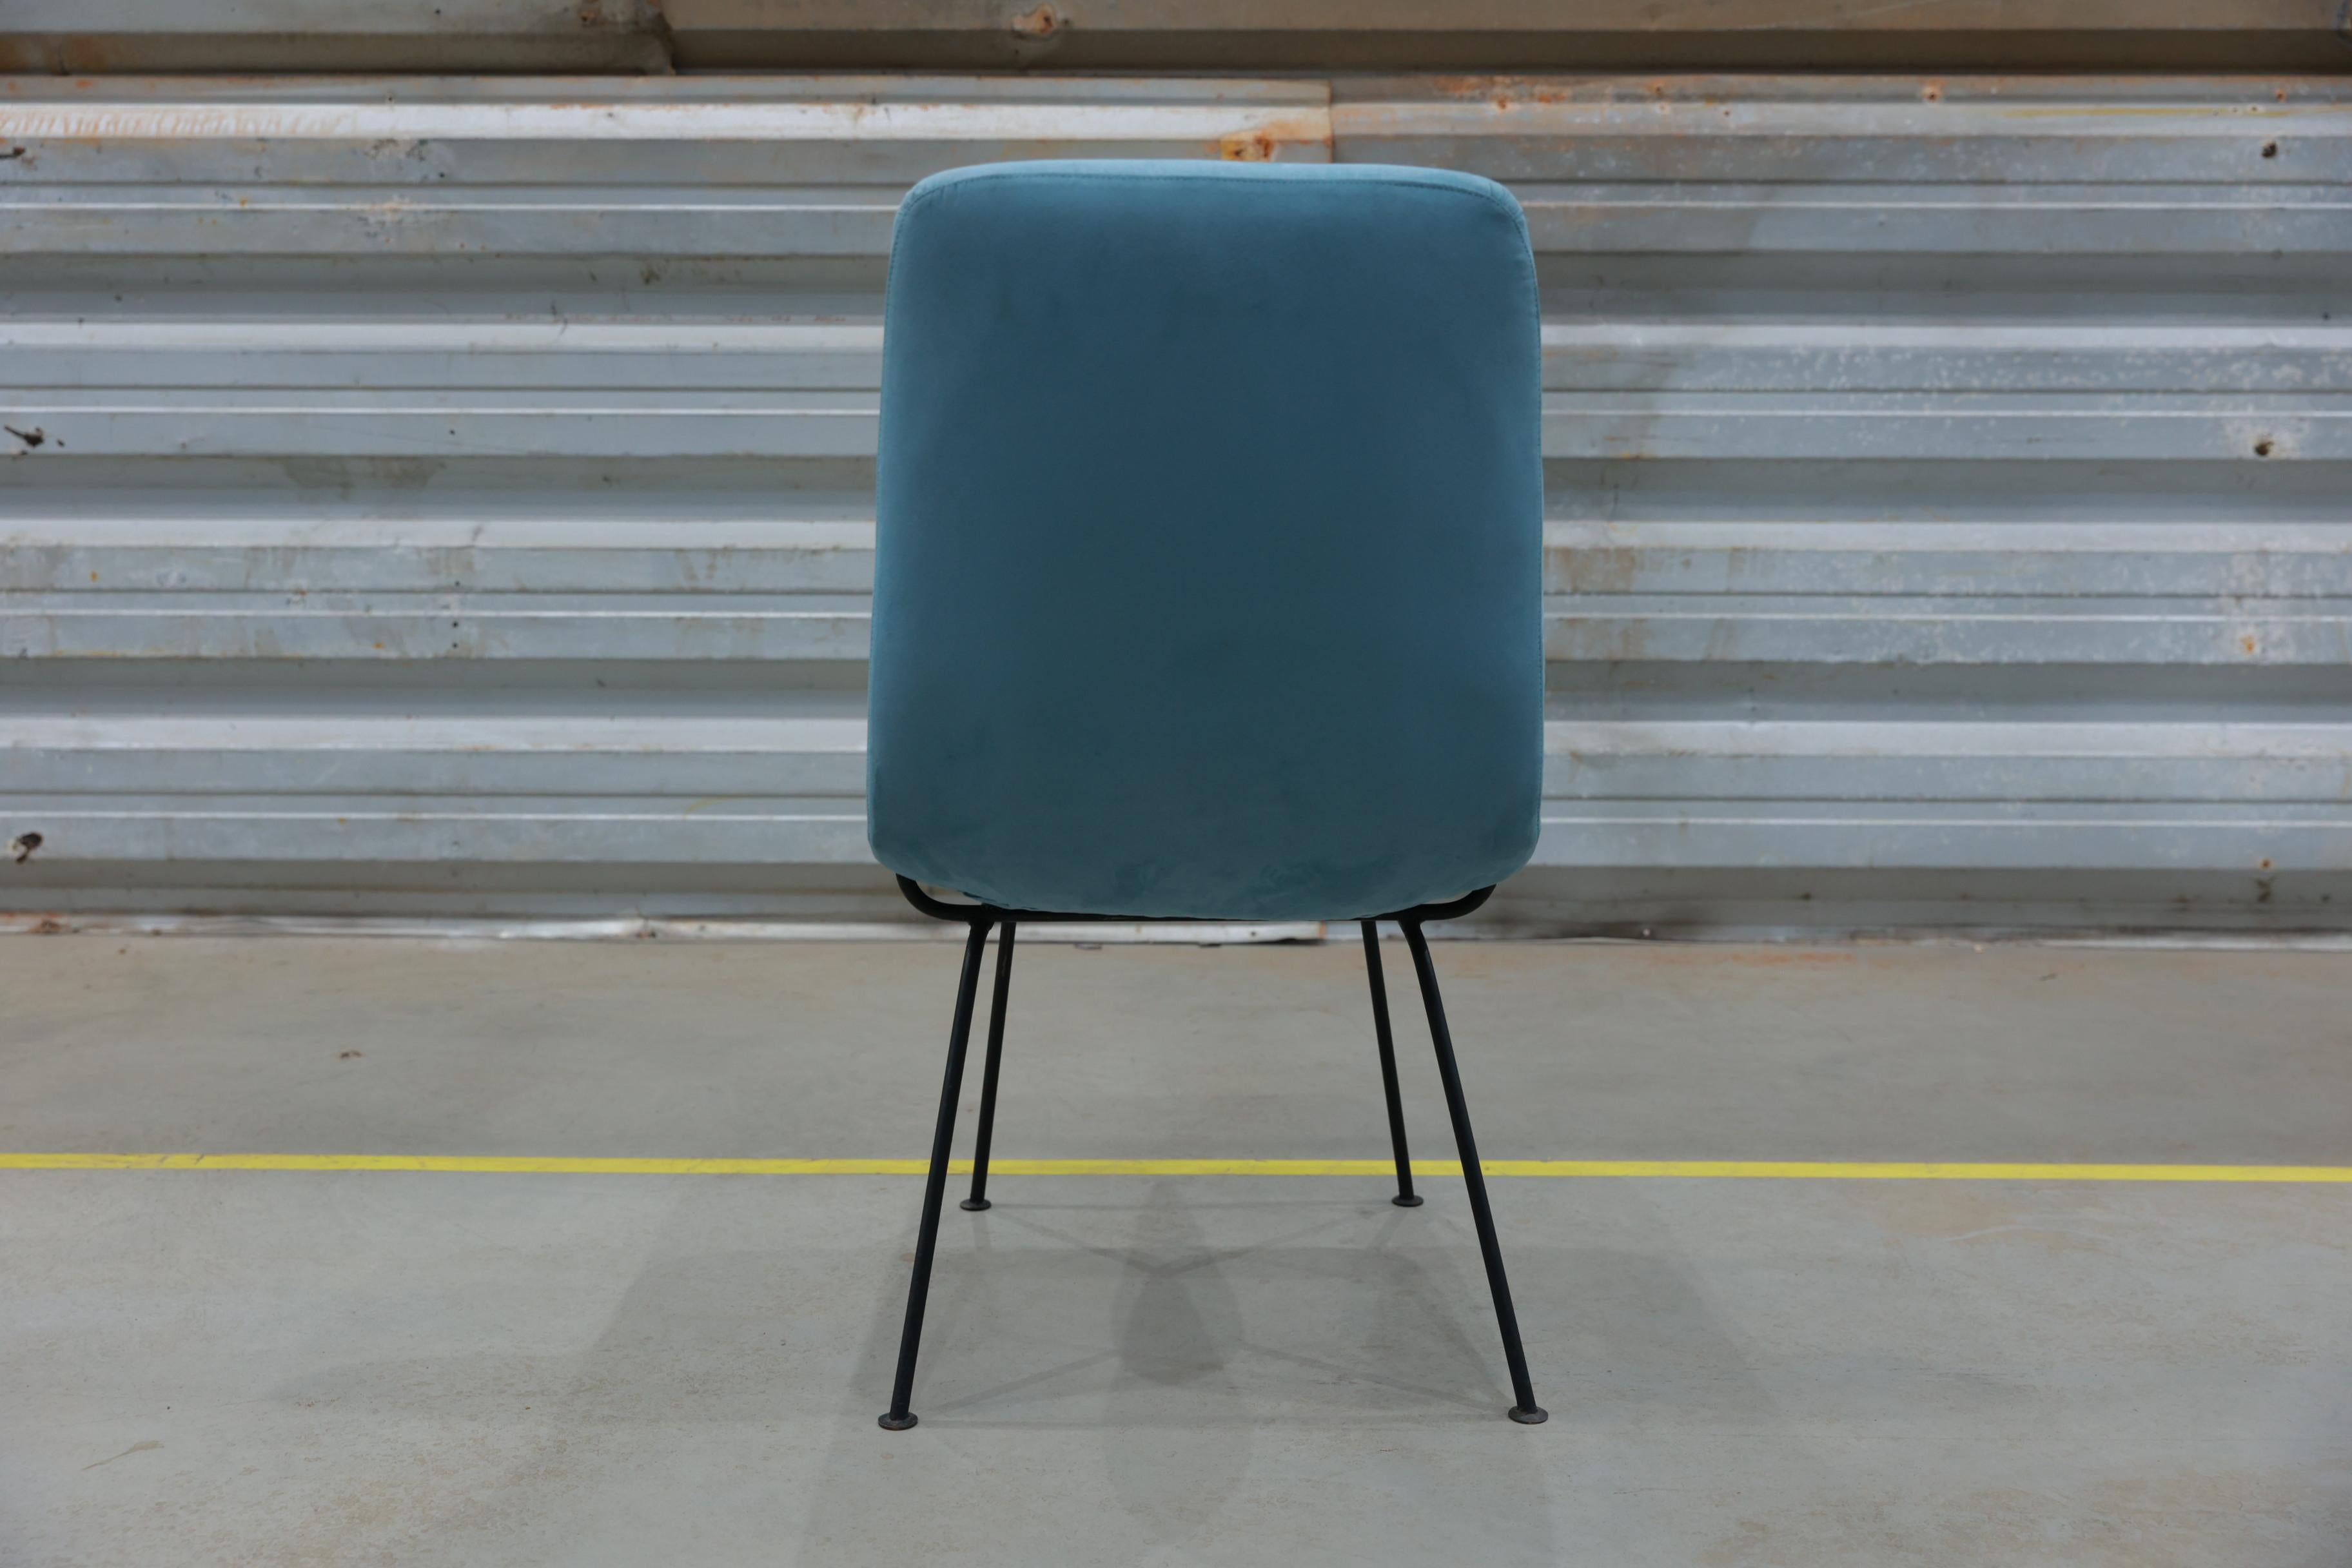 Iron Brazilian Modern Chairs in Metal and Fabric by Carlo Hauner, 1950s, Brazil For Sale